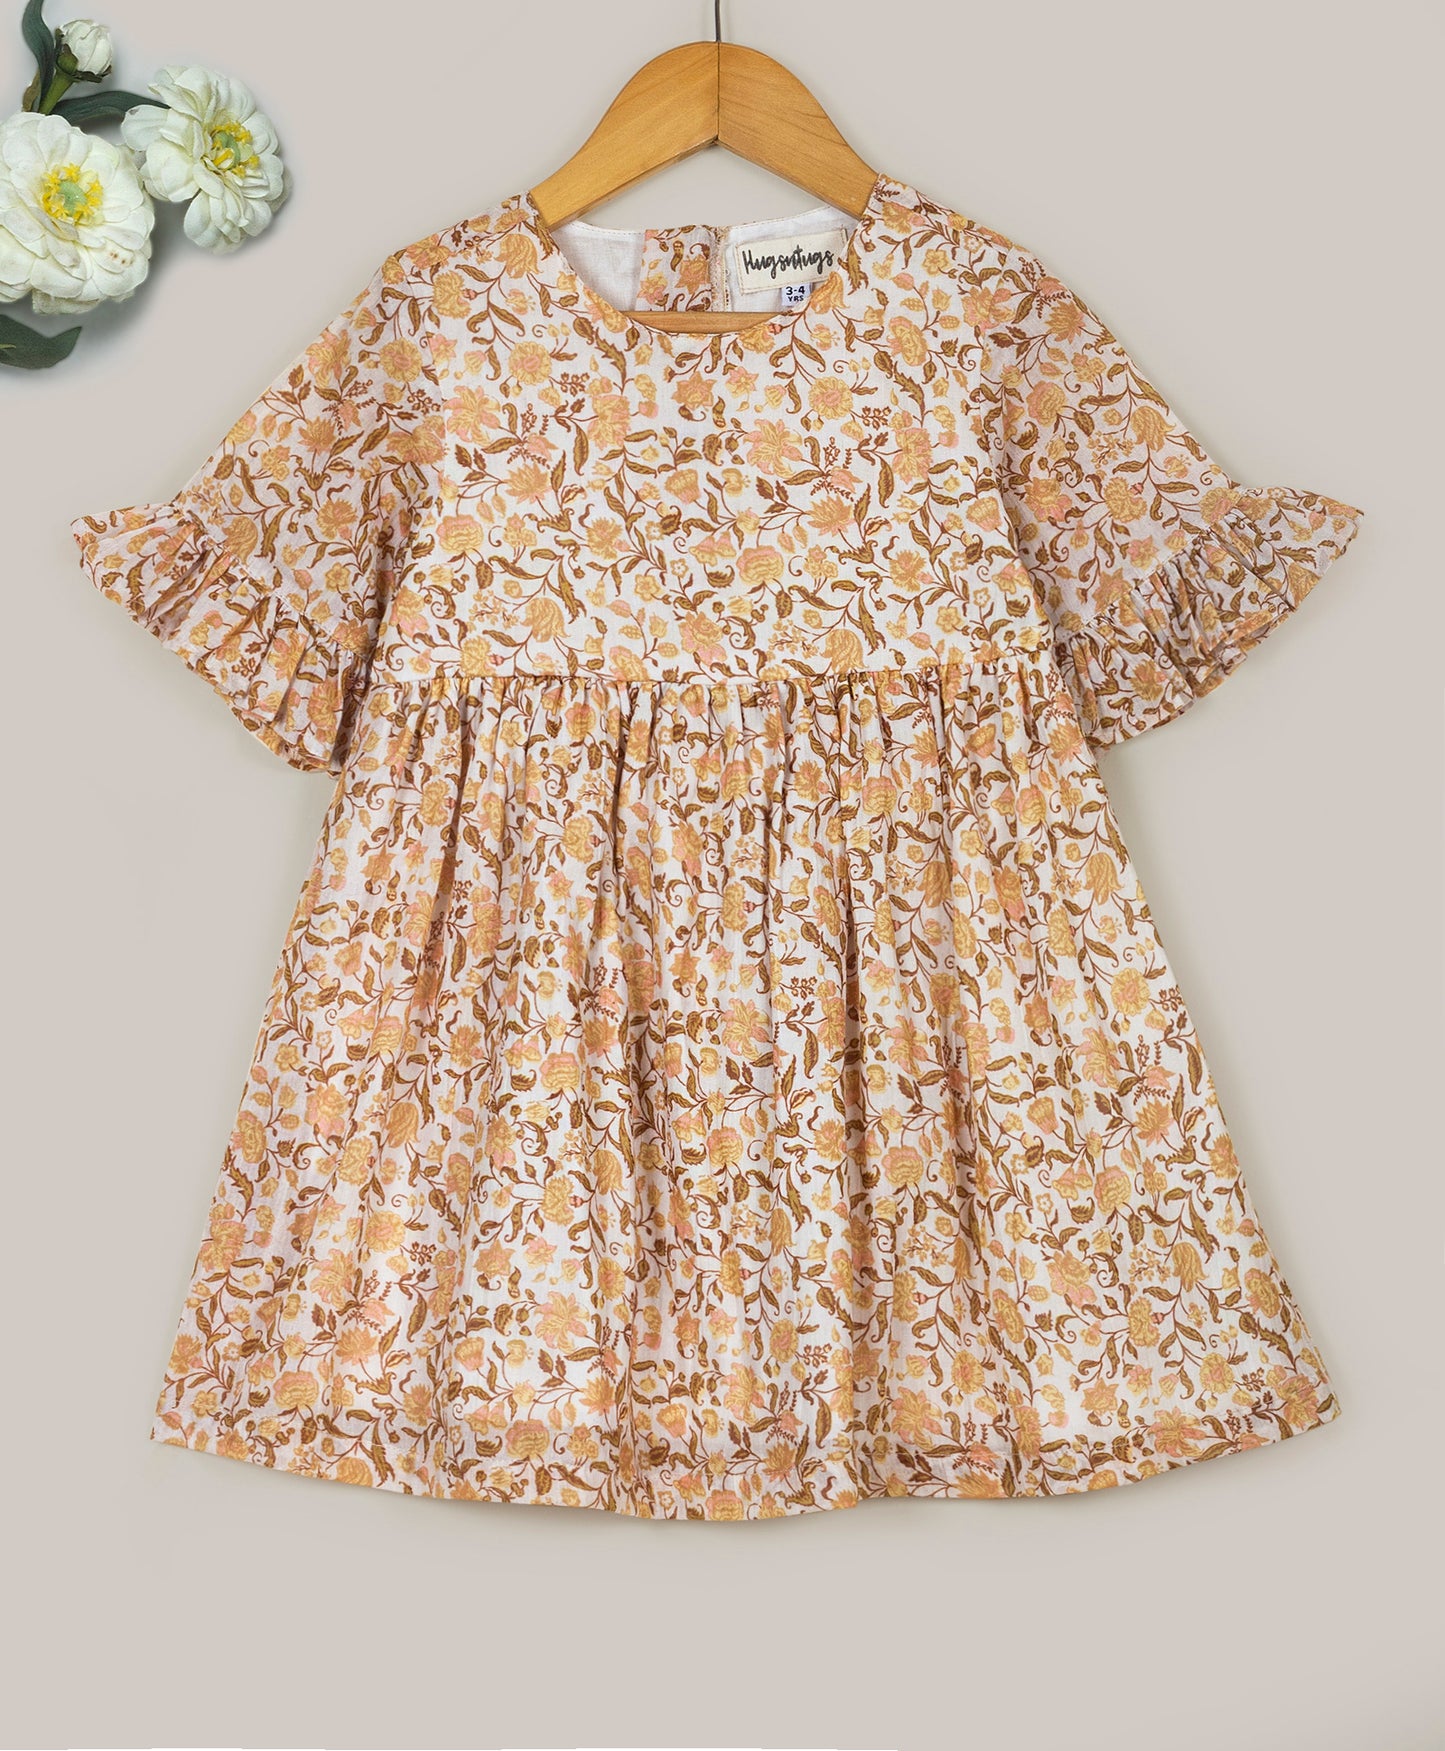 Floral all over print dress with frills at the sleeveend